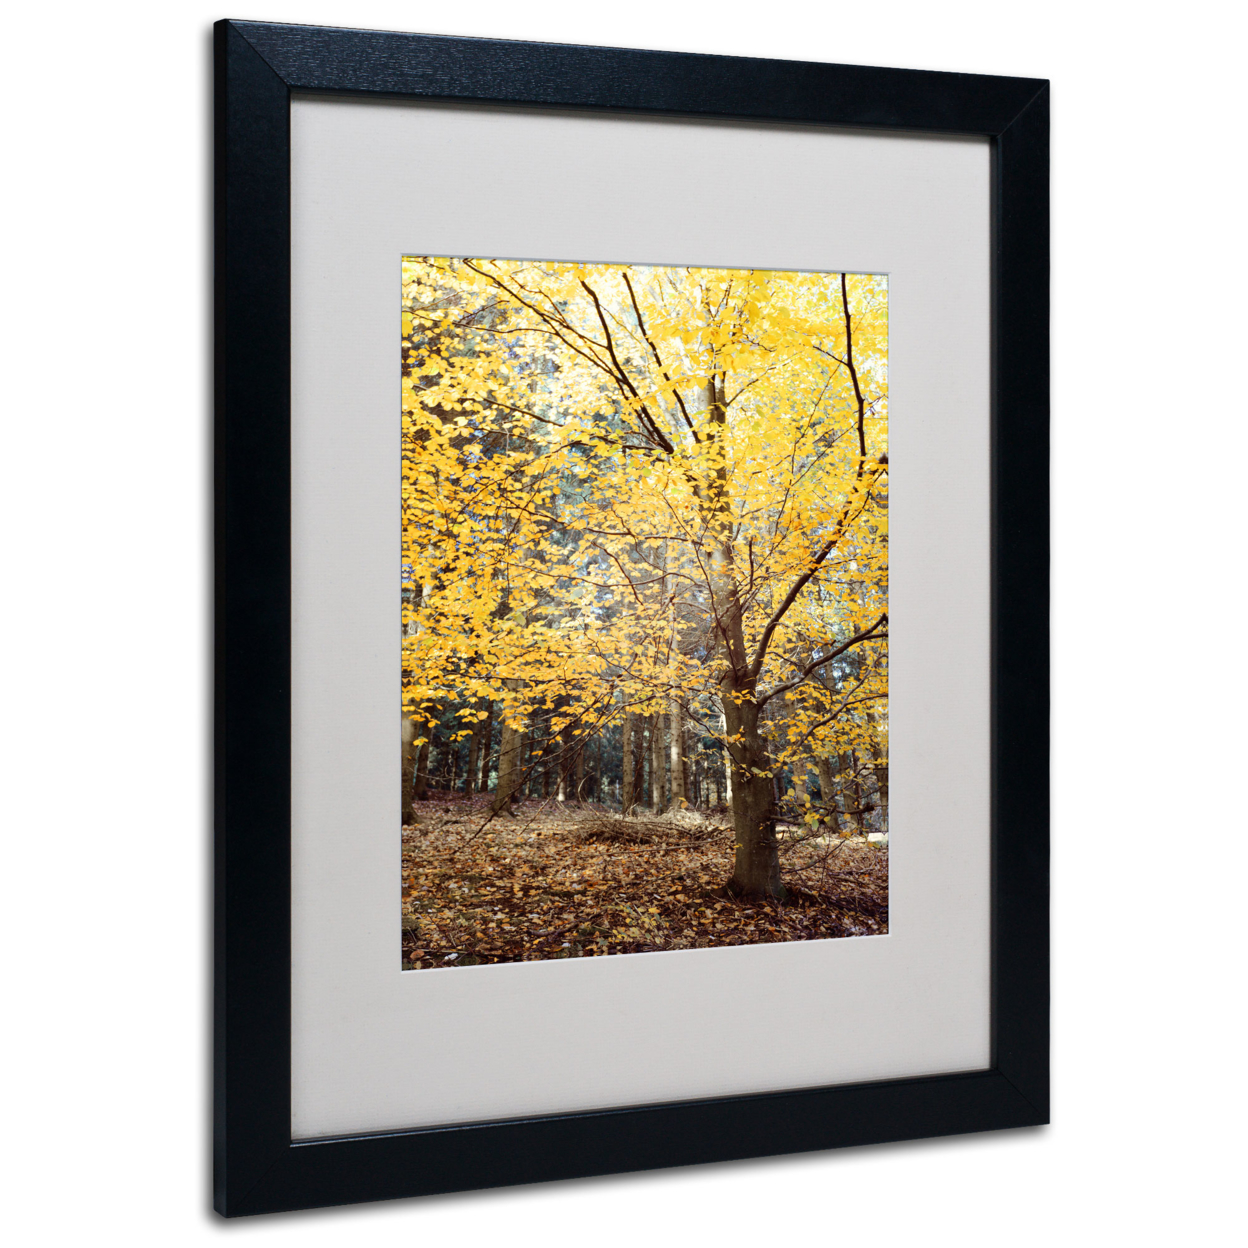 Philippe Sainte-Laudy 'Yellow Fall' Black Wooden Framed Art 18 X 22 Inches